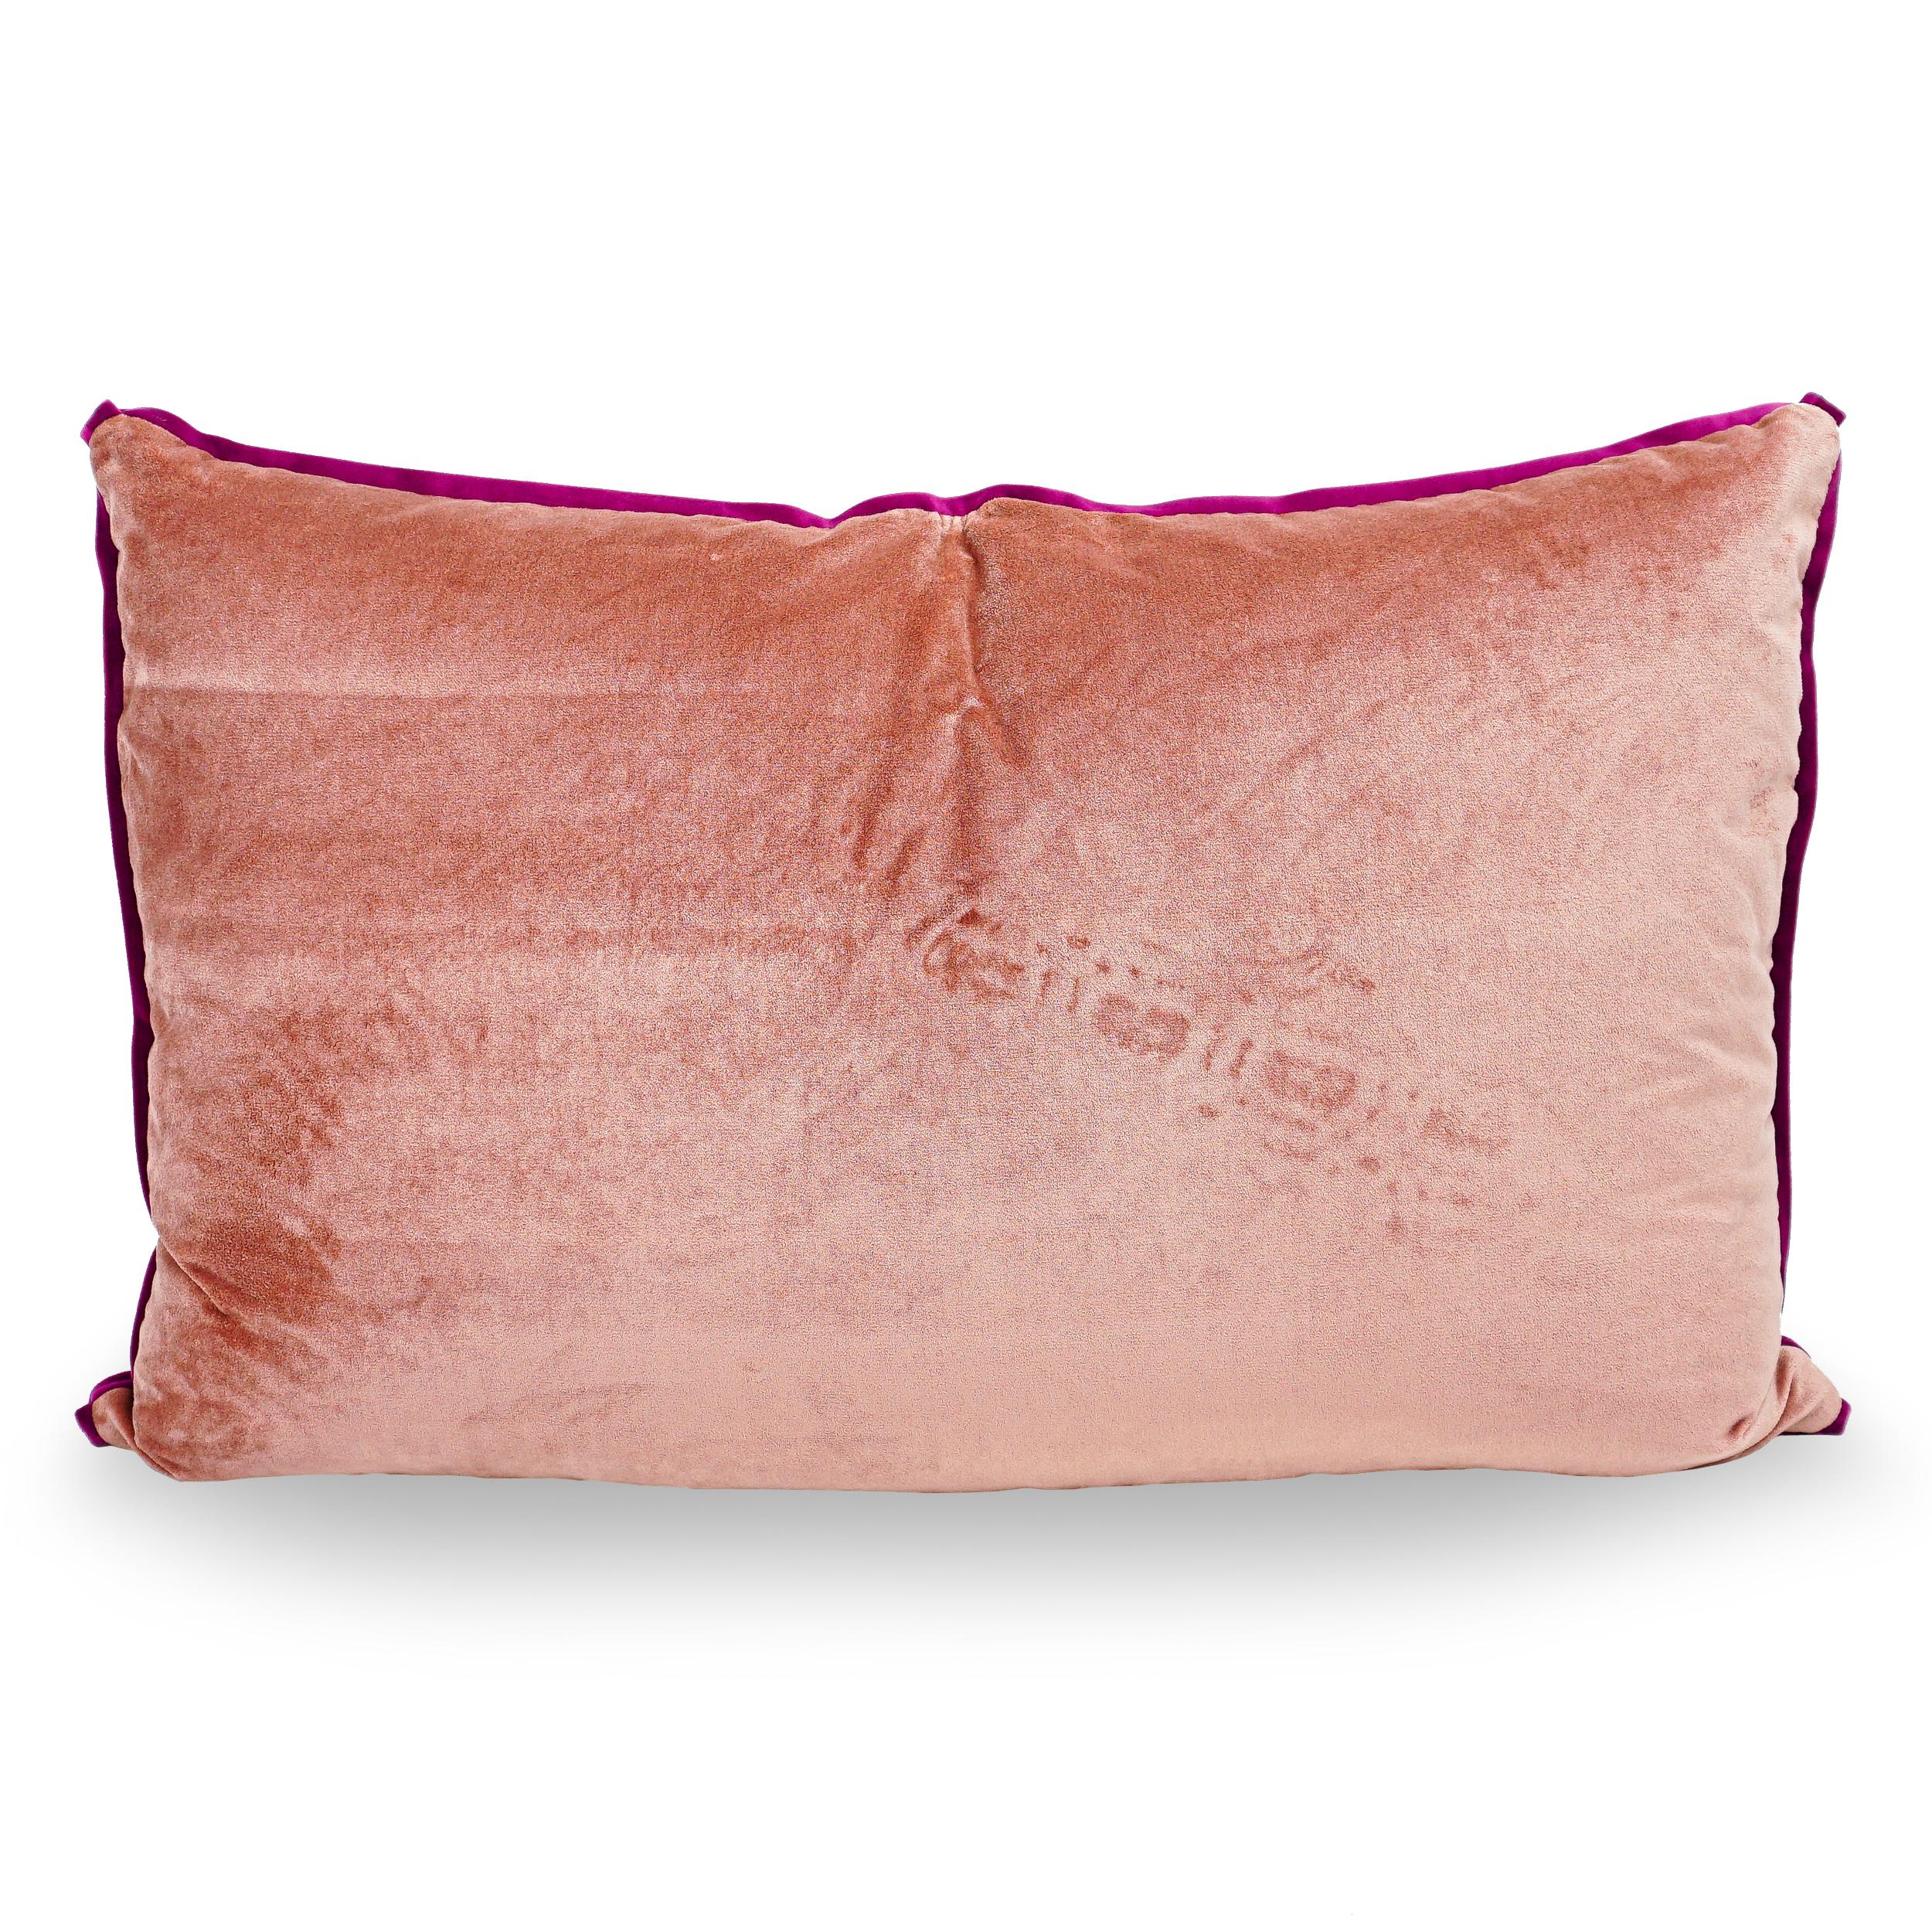 Exotic Playful Oversized Pillow with Elephant Camel Printed Cotton & Pink Velvet For Sale 2